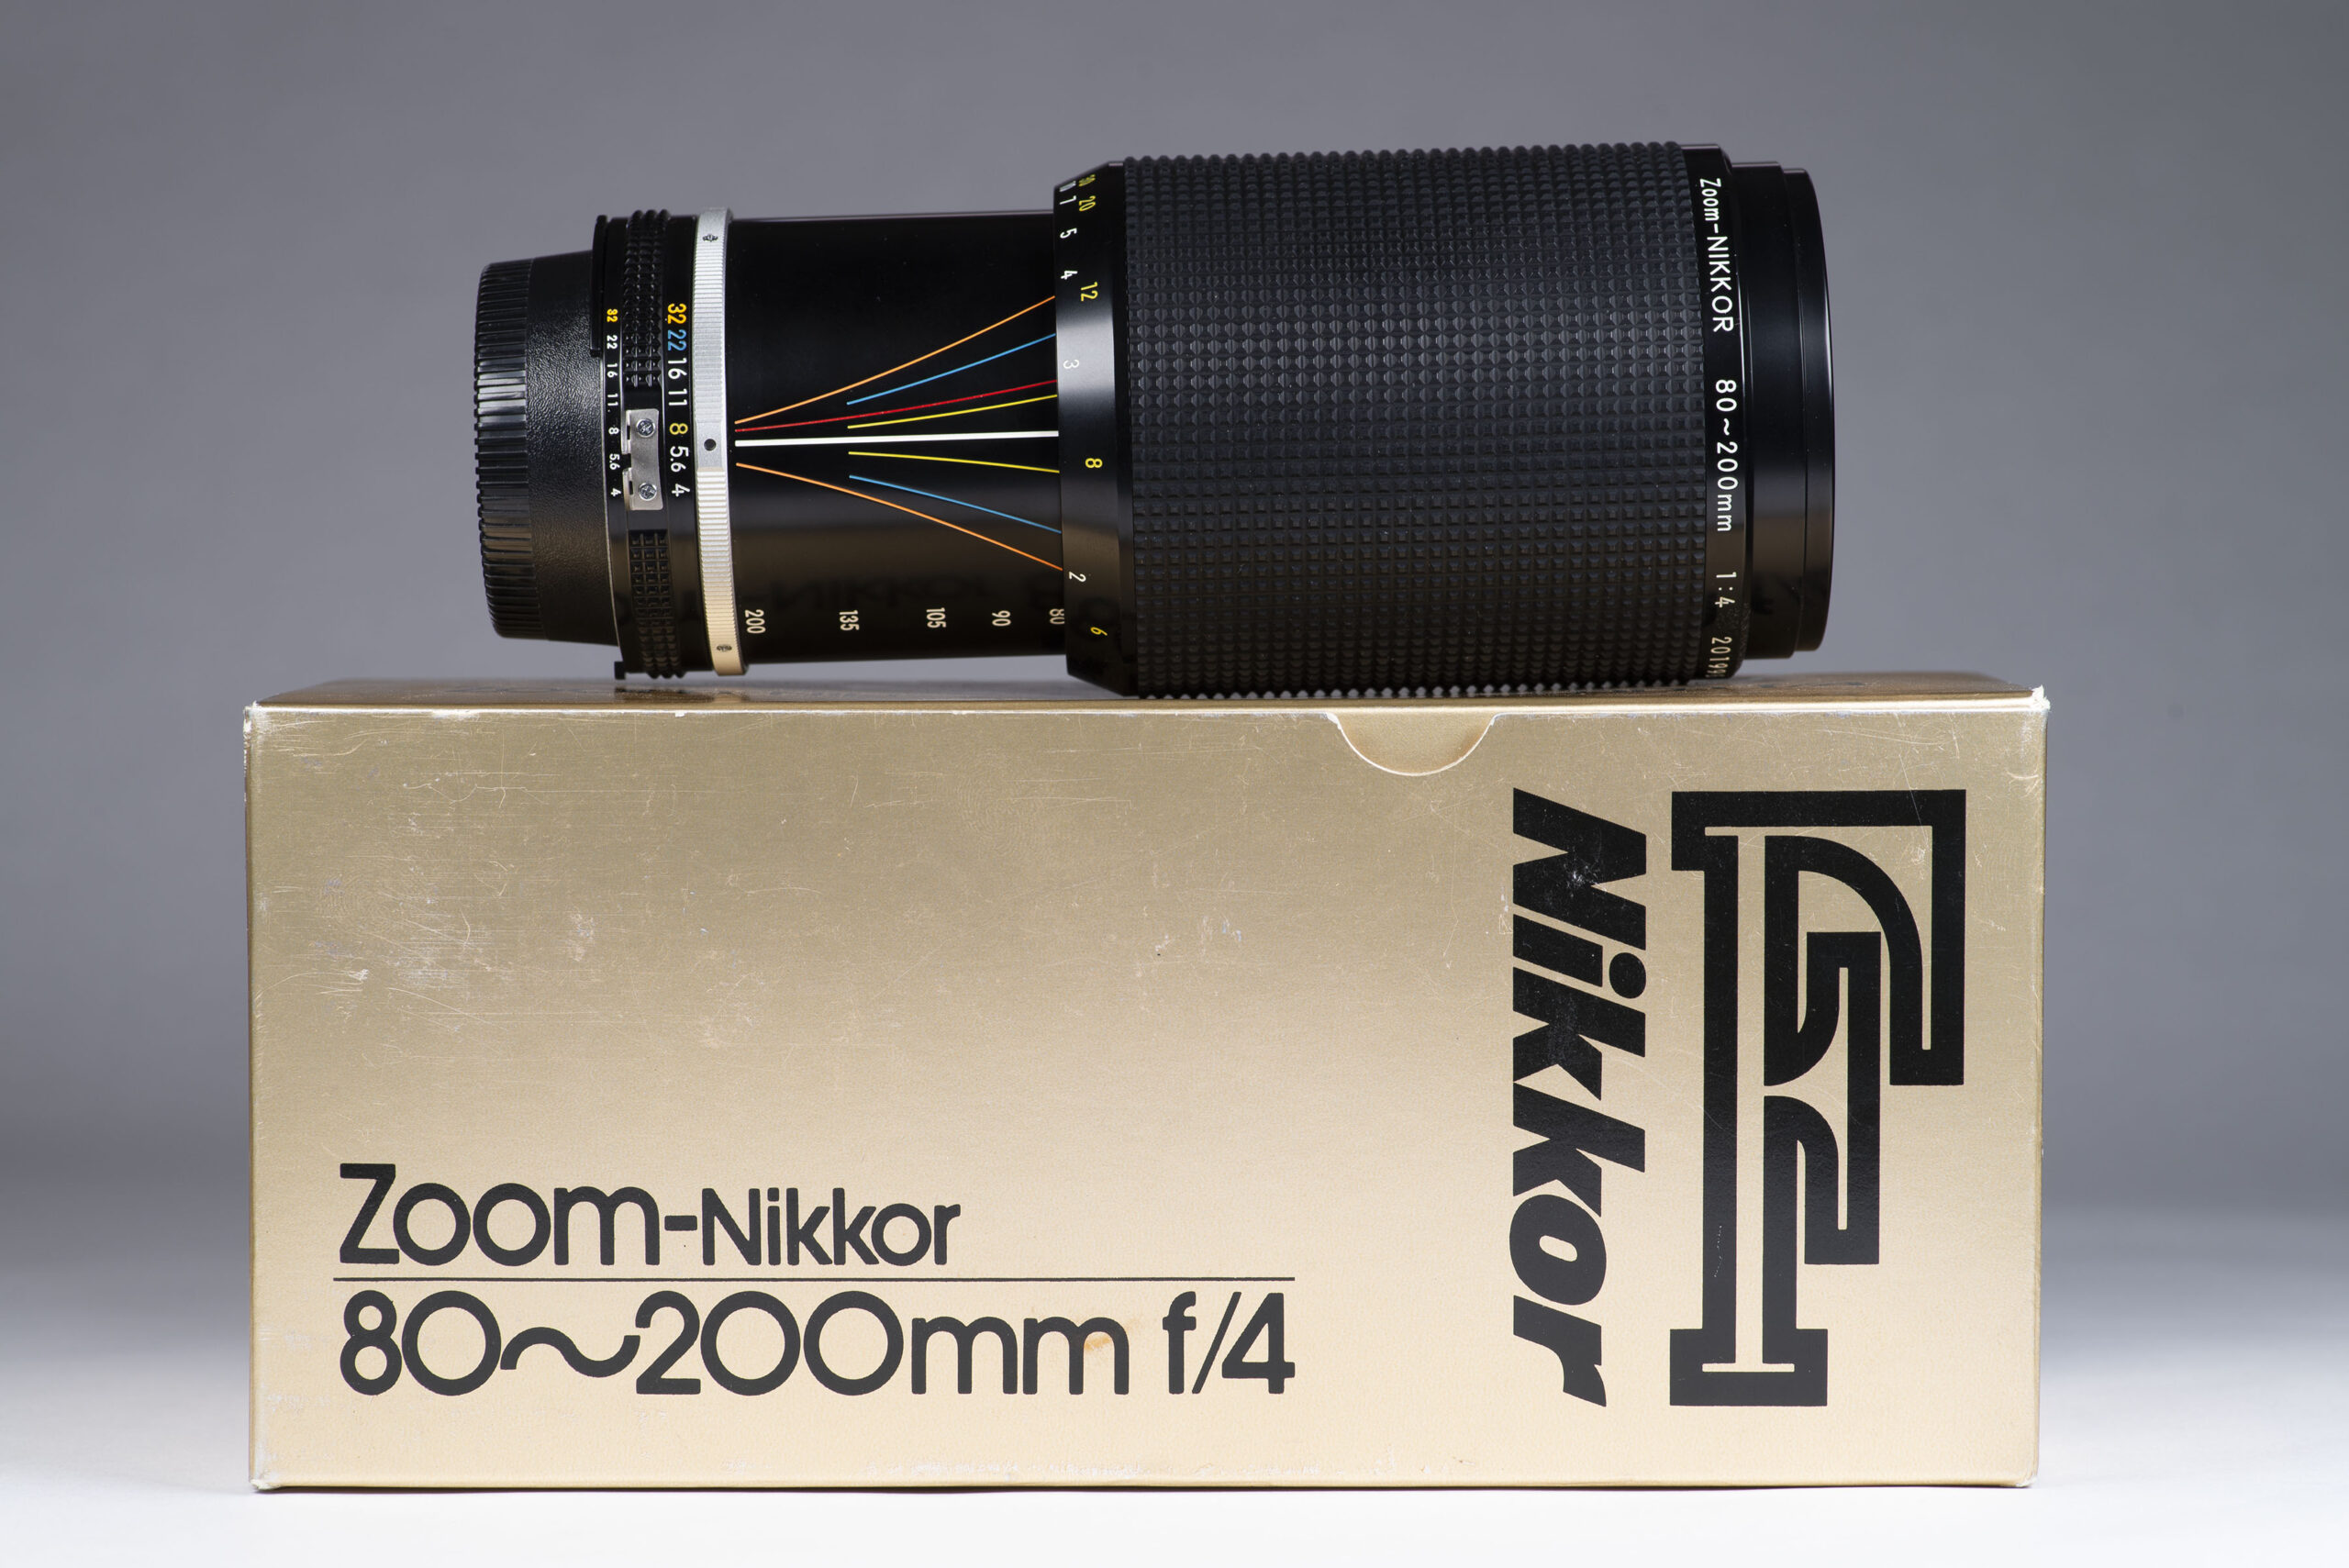 Legacy Lens Review: Zoom-Nikkor 80-200mm f4 Ai-s - The Noisy Shutter